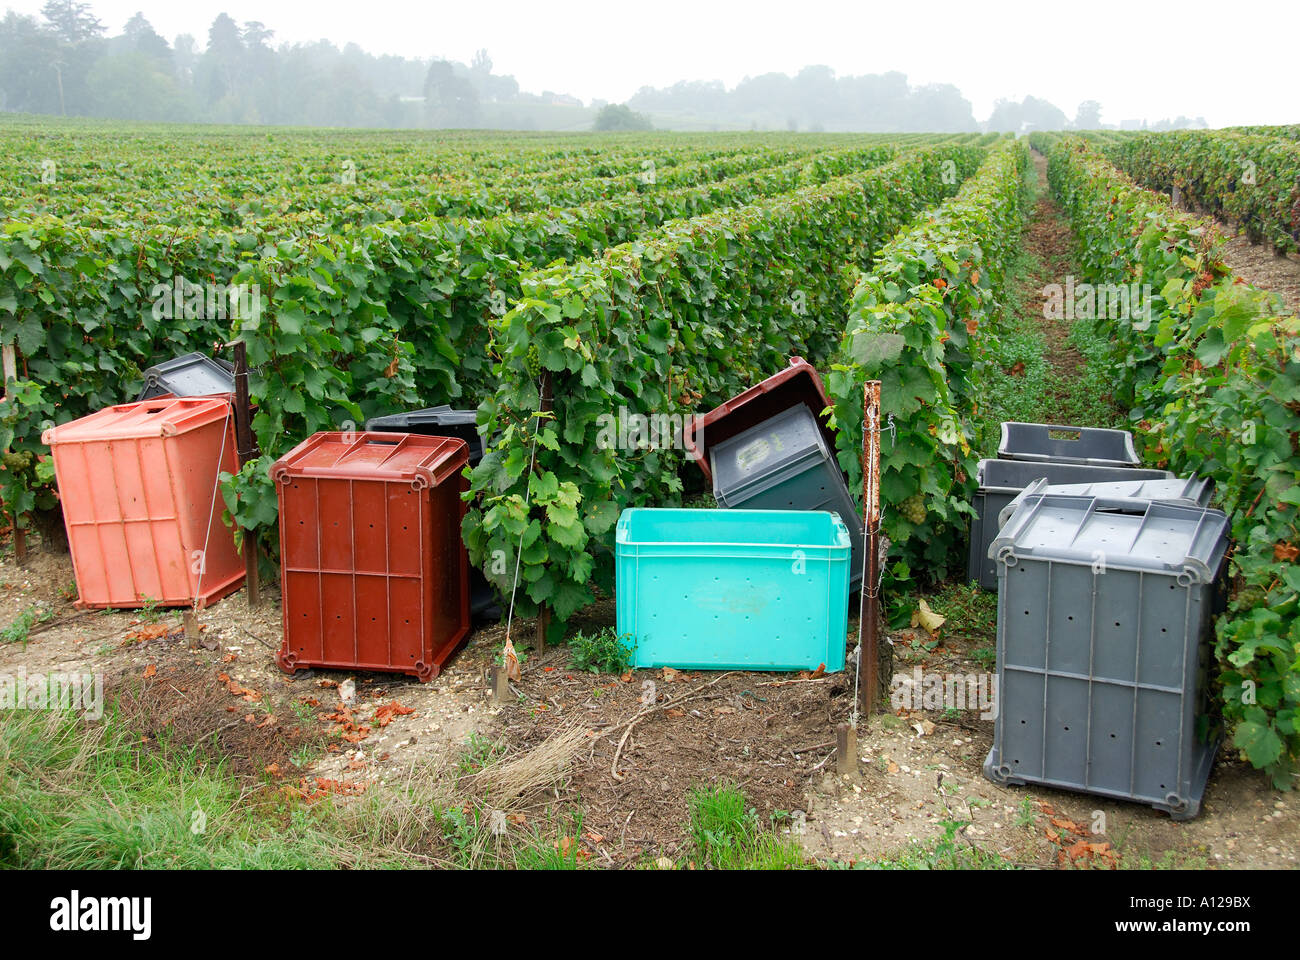 'Bins ^awaiting grape pickers, 'Villers Allerand', 'Champagne Ardennes', France' Stock Photo